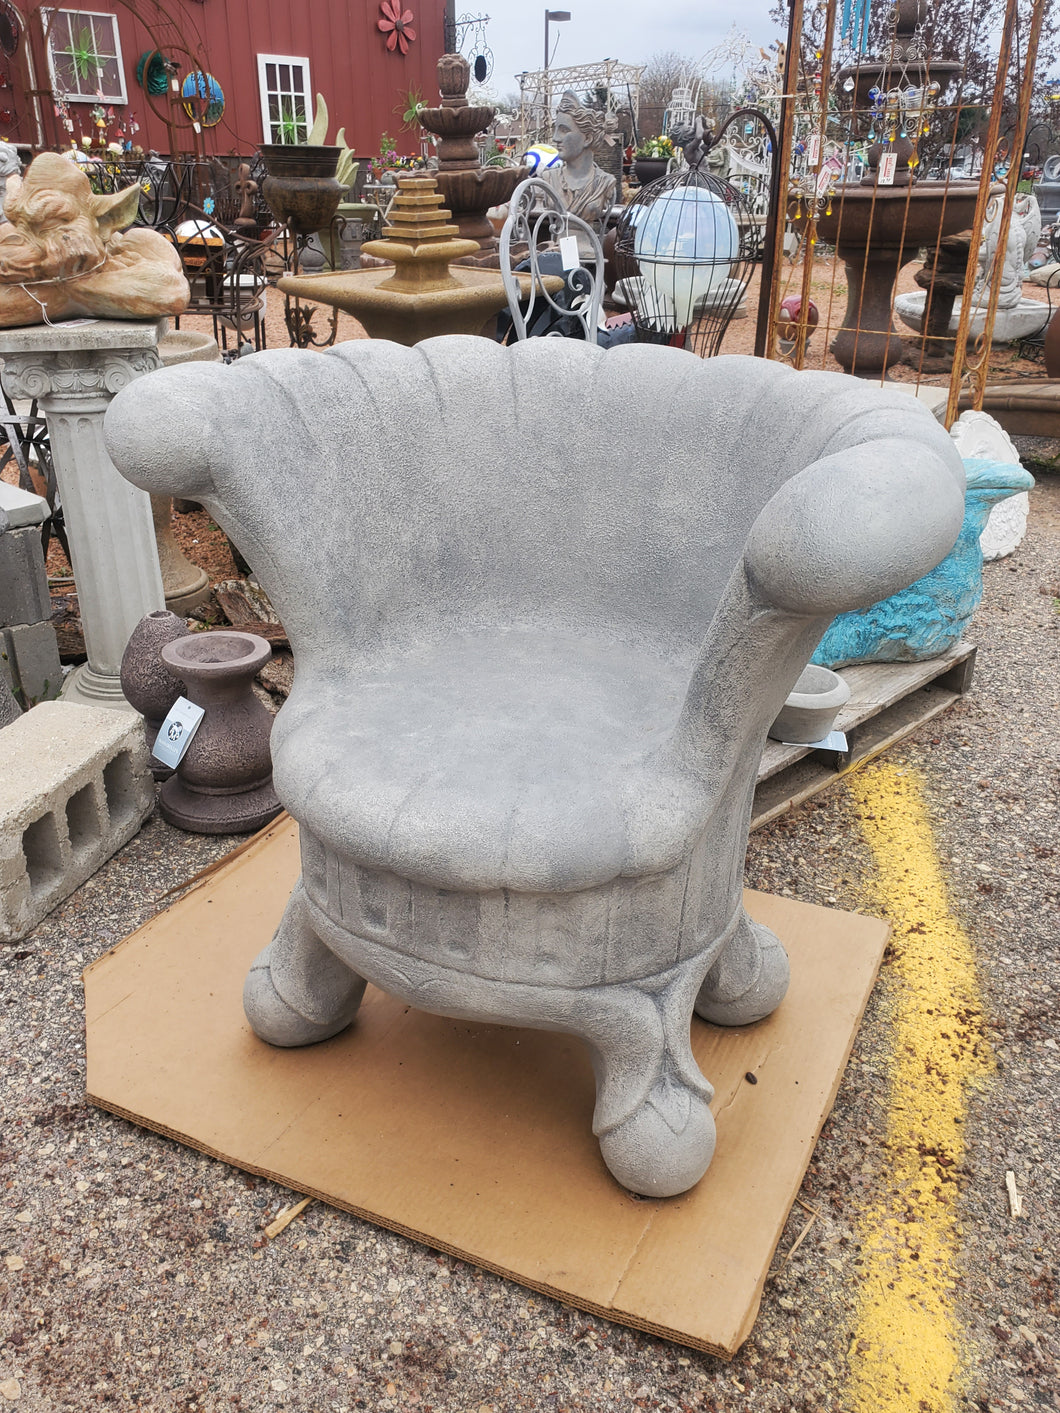 THRONE-SHAPED, GREY 'STONE' | WIDE ENOUGH TO SIT ON | TUFTED, CURVED BACK, AND ARMS. 300 POUNDS.